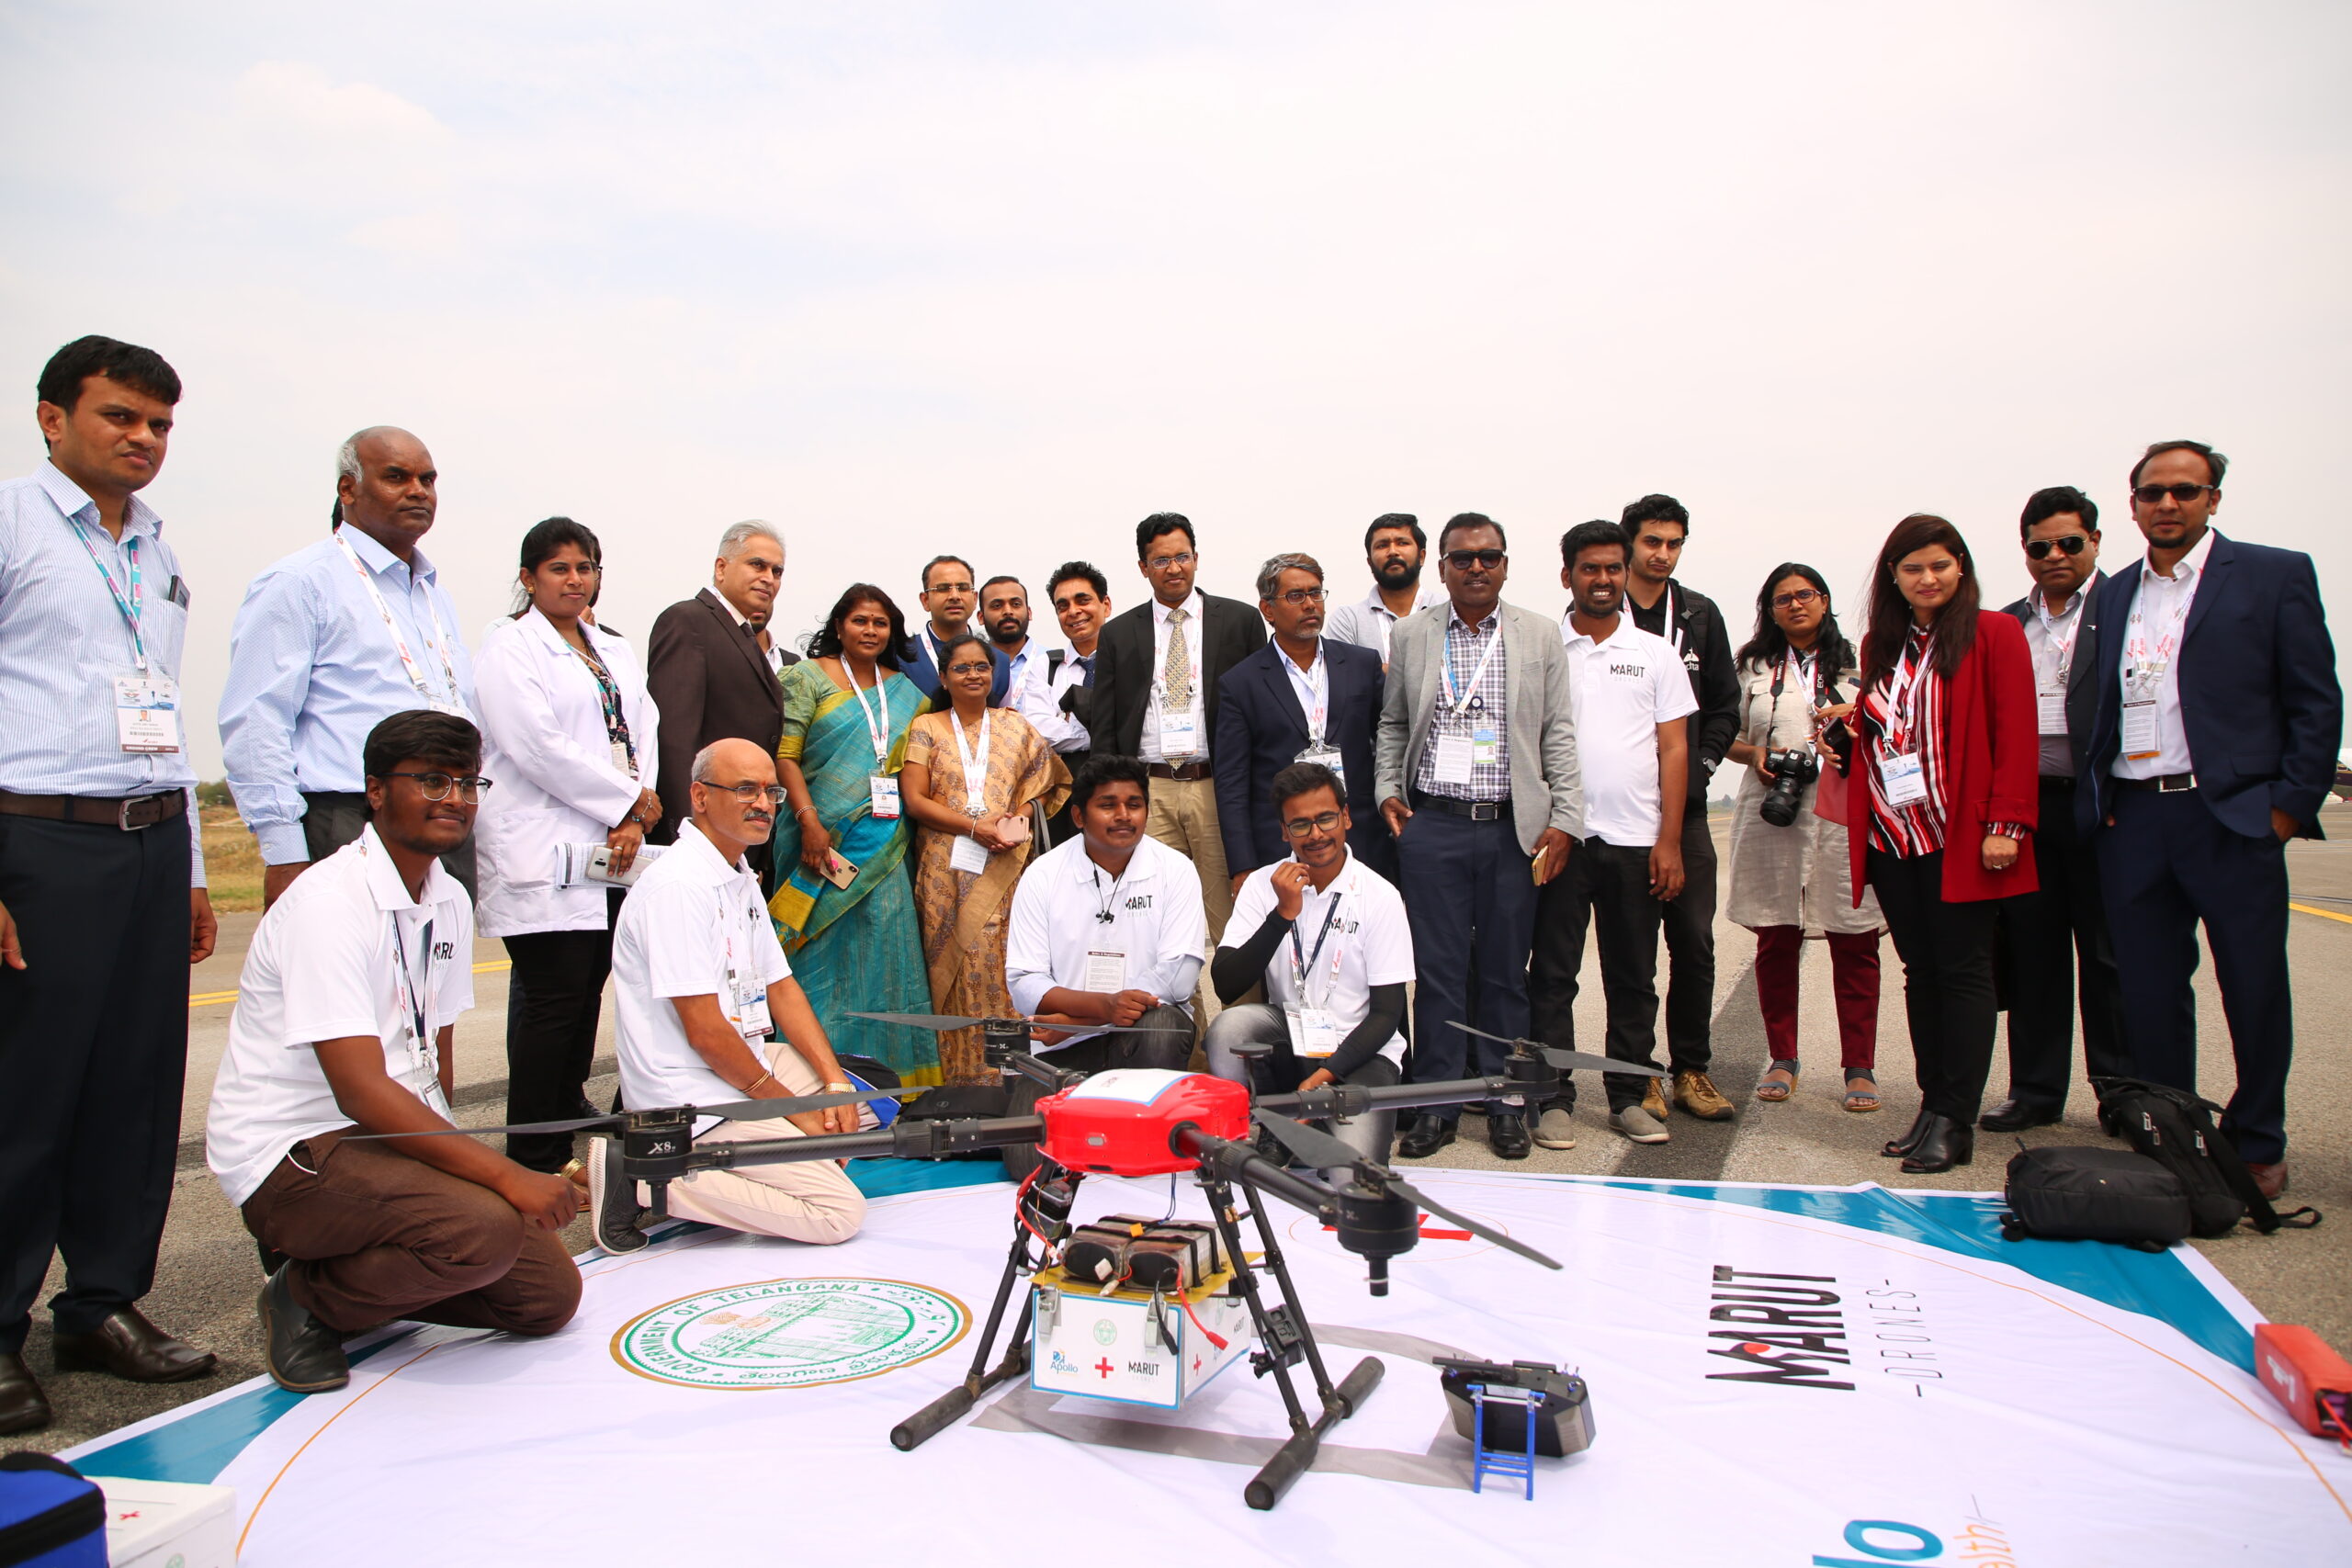 drone project for agriculture